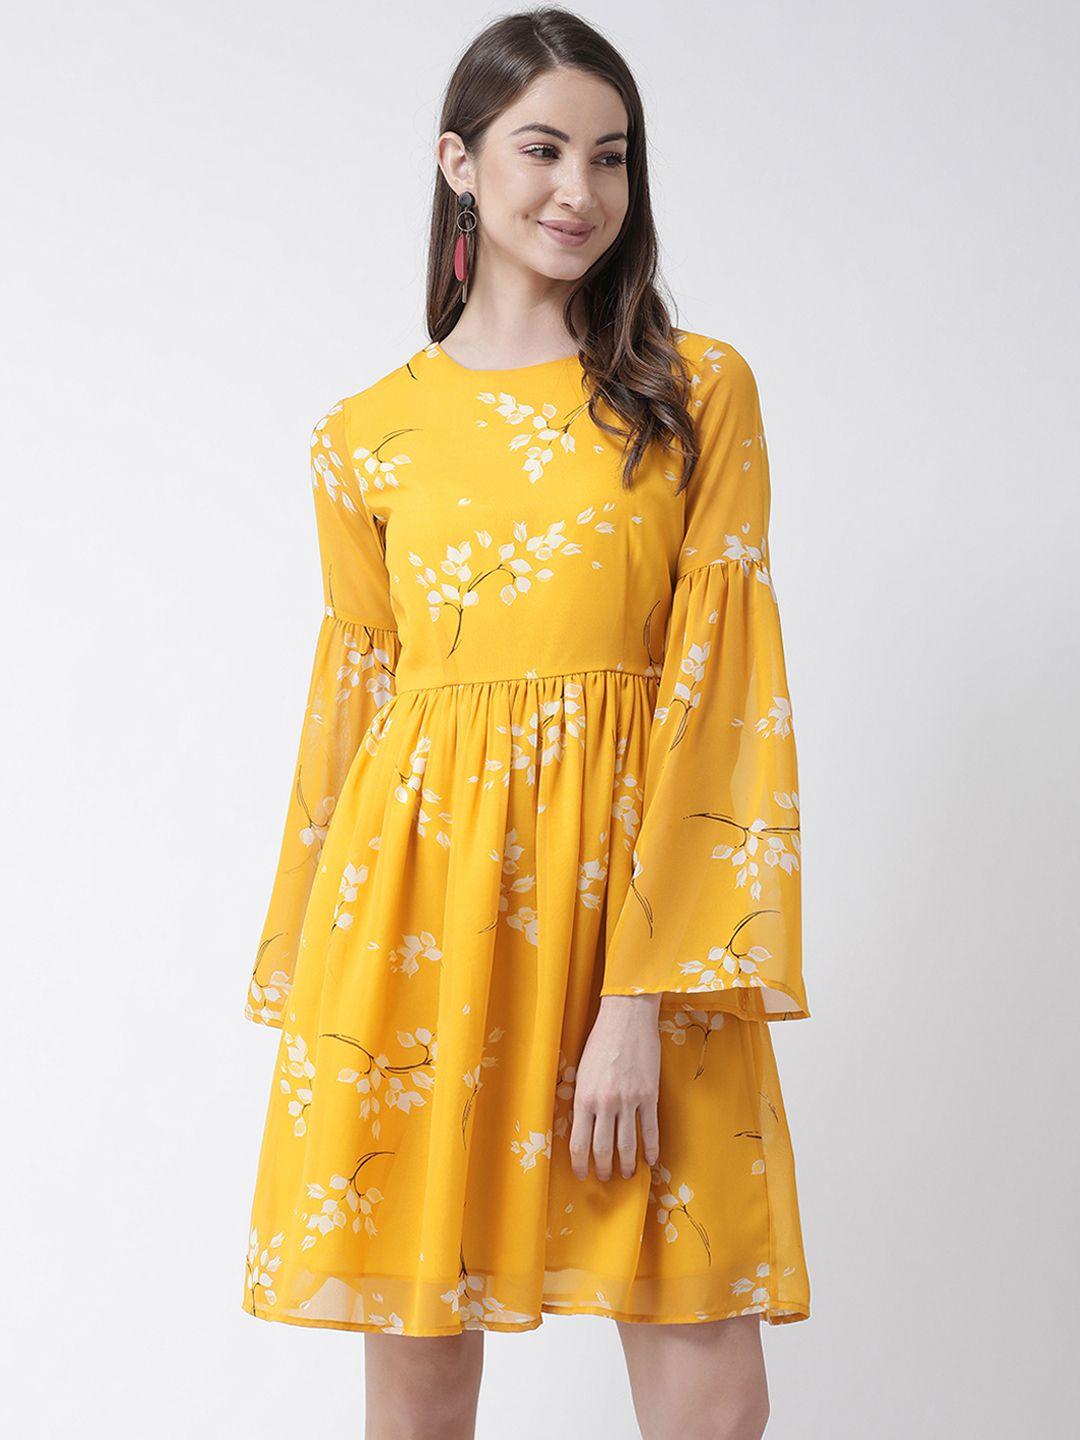 kassually-women-yellow-printed-fit-and-flare-dress